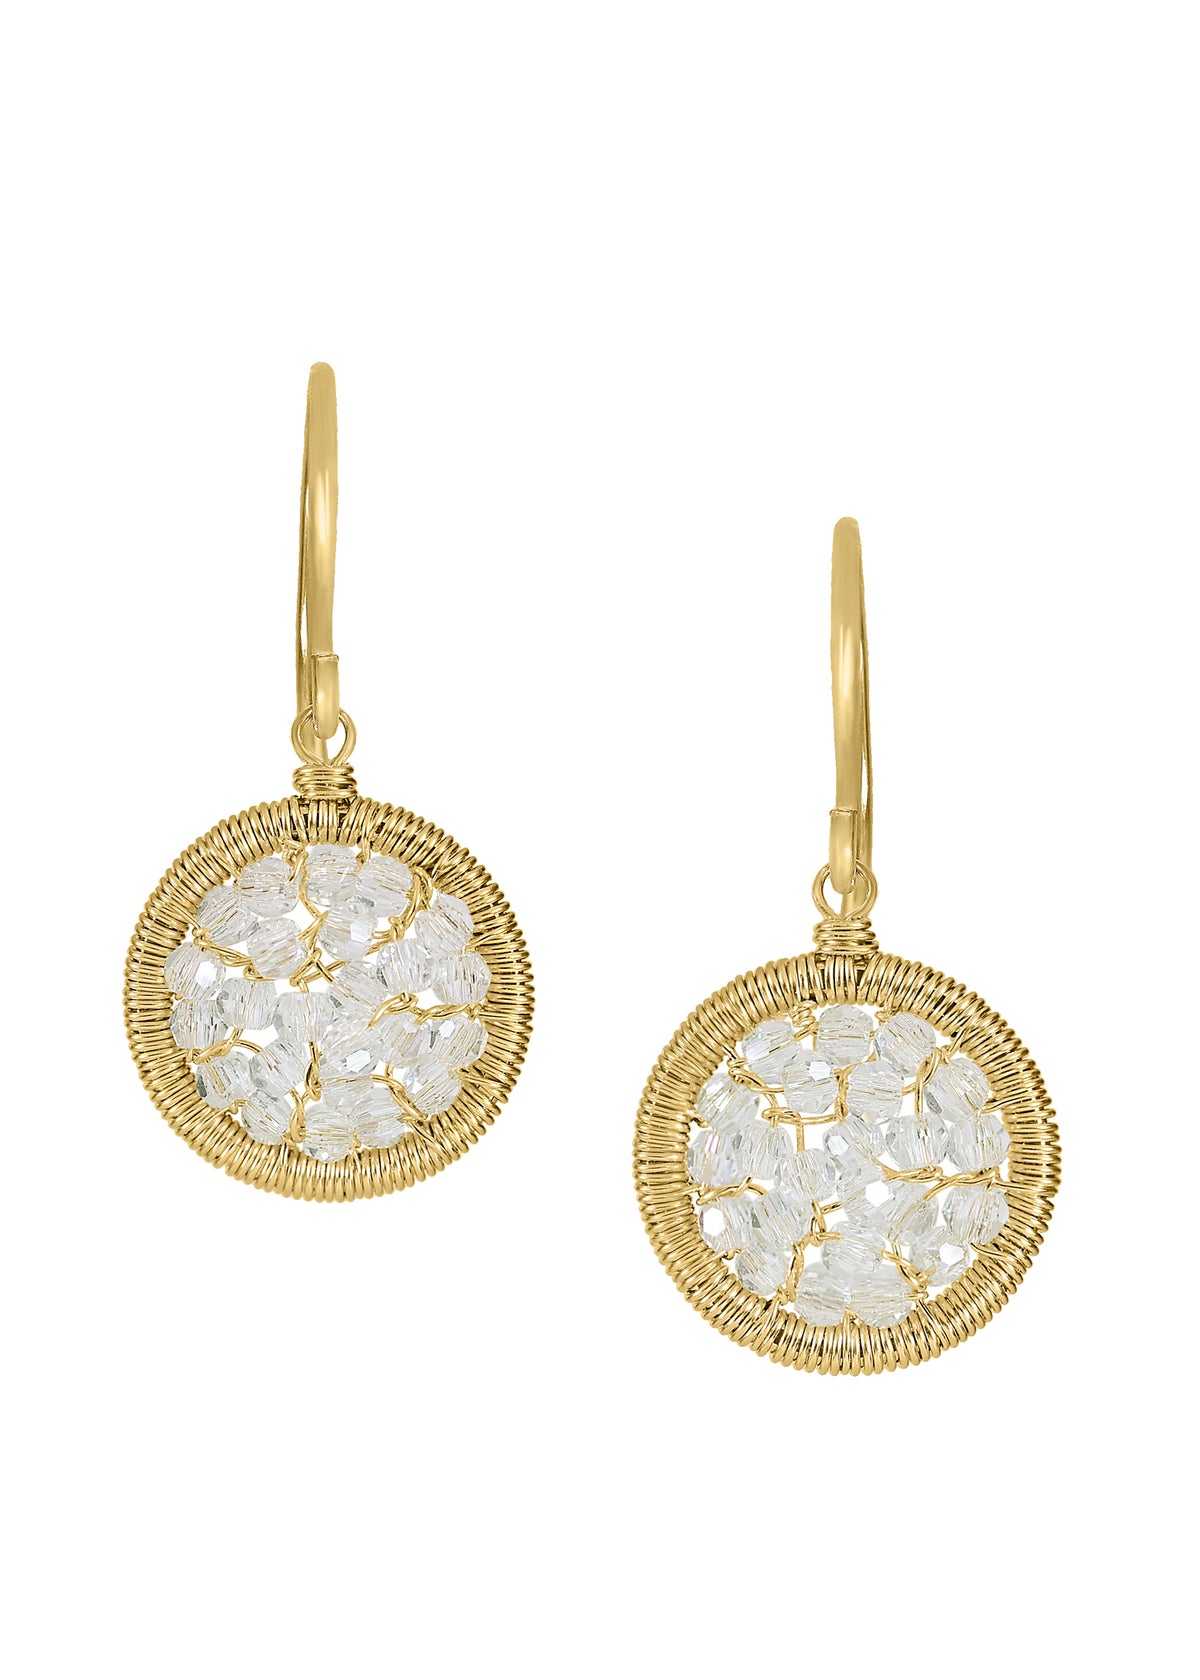 Crystal 14k gold fill Earrings measure 1&quot; in length (including the ear wires) and 1/2&quot; in width Handmade in our Los Angeles studio